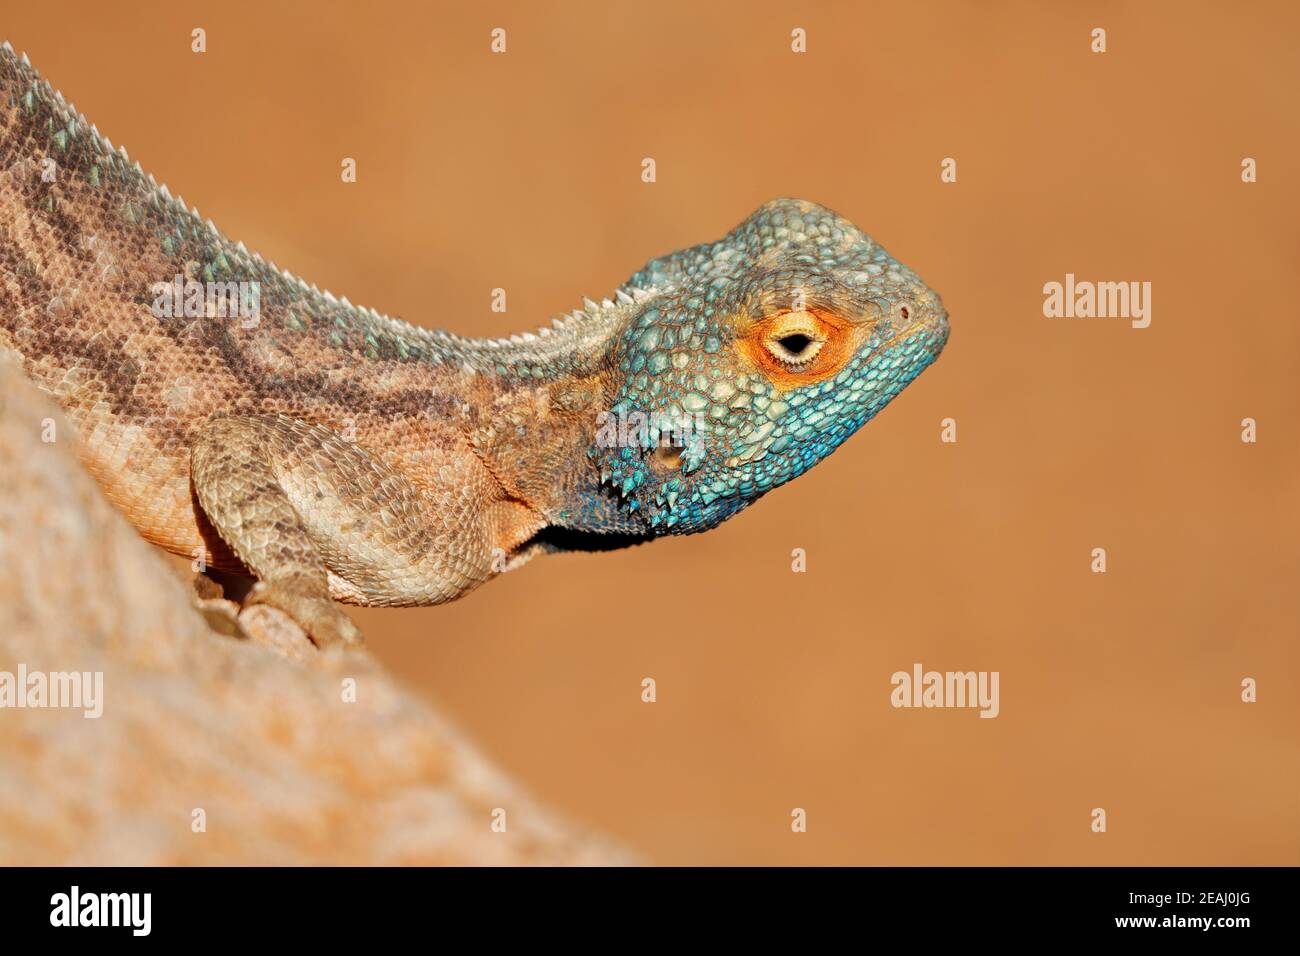 Portrait of a ground agama on a rock Stock Photo